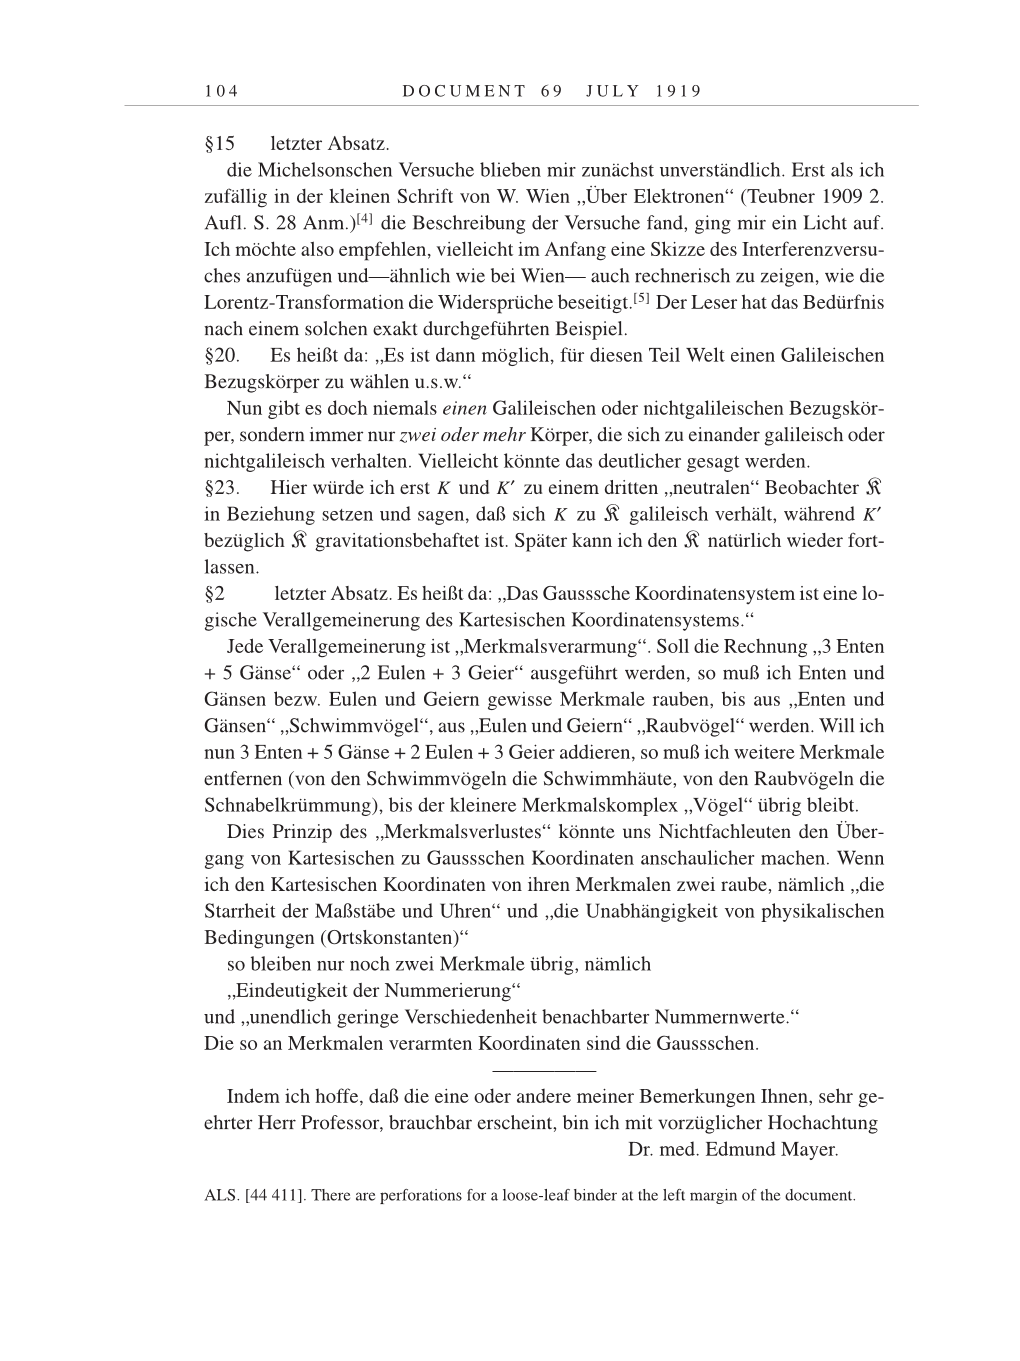 Volume 9: The Berlin Years: Correspondence January 1919-April 1920 page 104